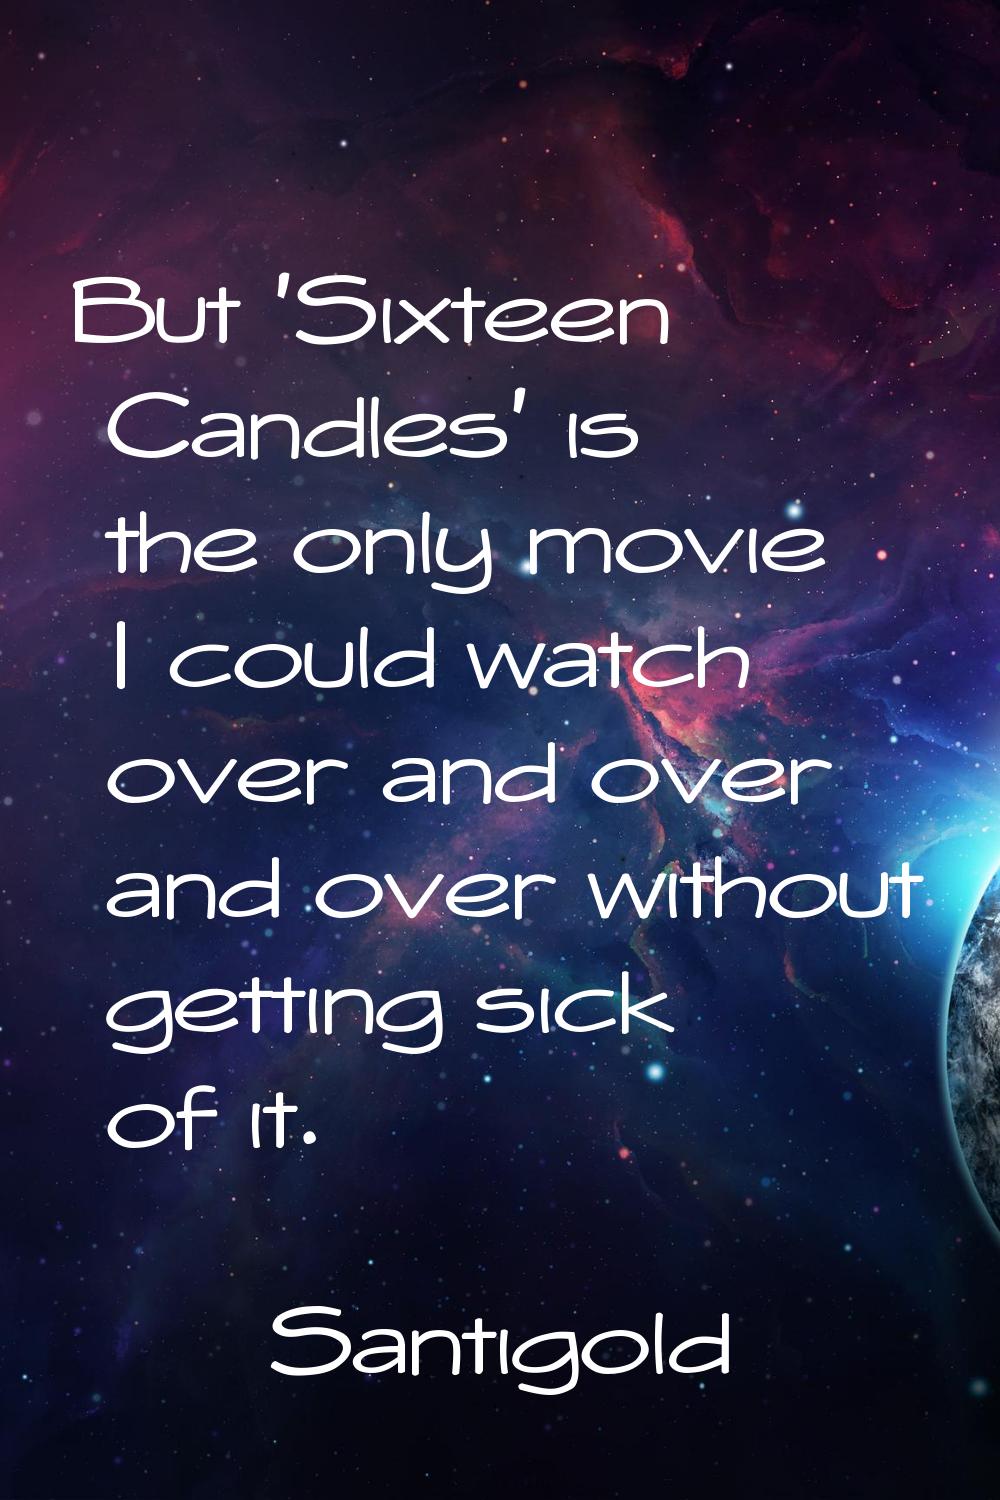 But 'Sixteen Candles' is the only movie I could watch over and over and over without getting sick o